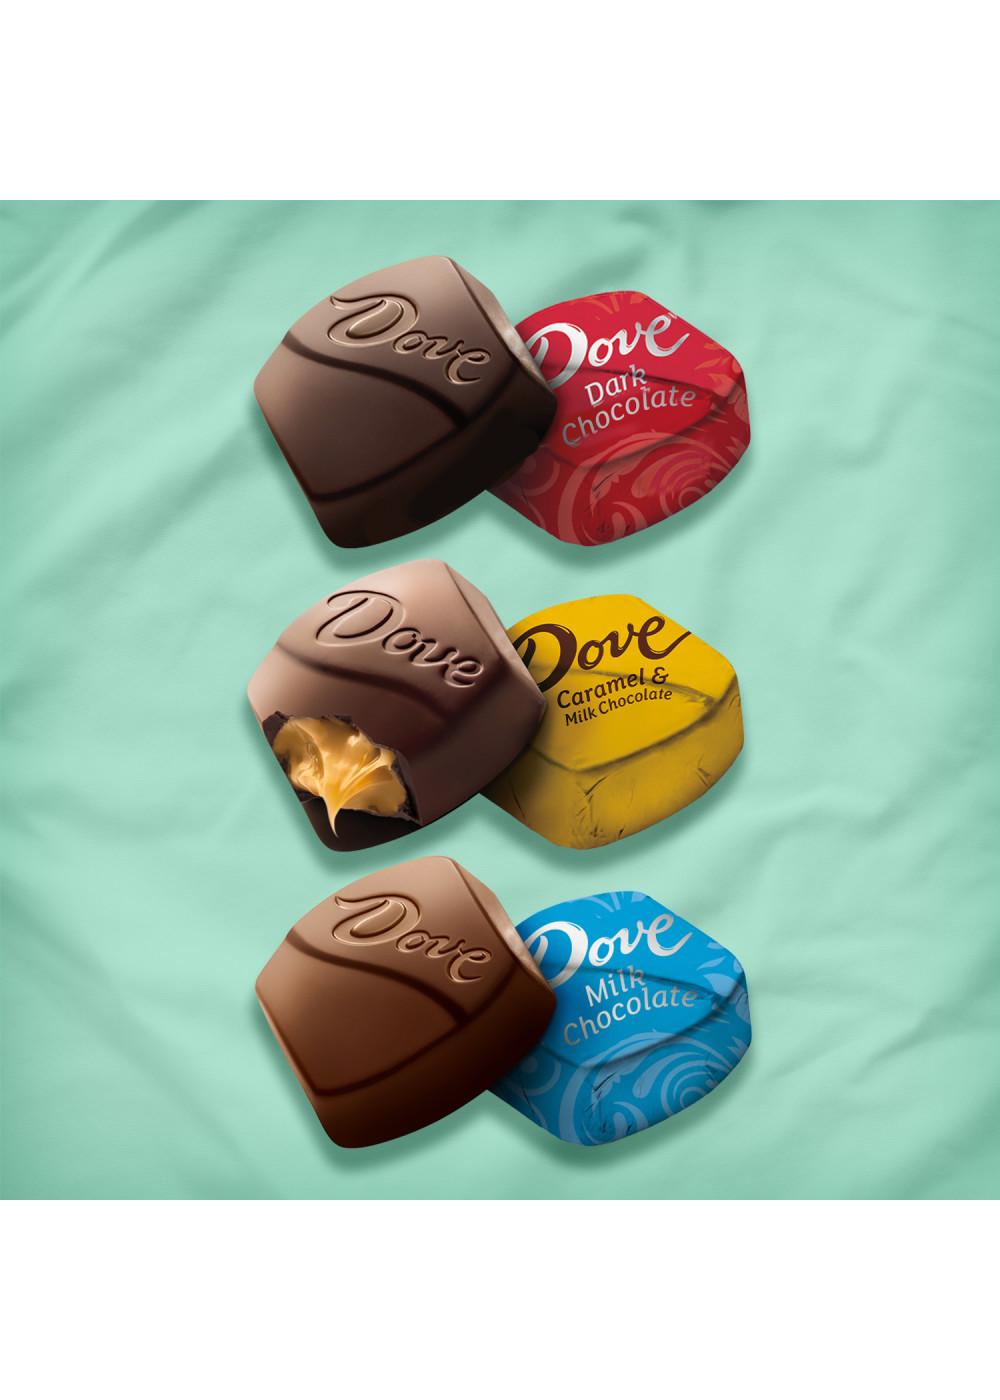 Dove Promises Milk Chocolate Candy - Shop Candy at H-E-B